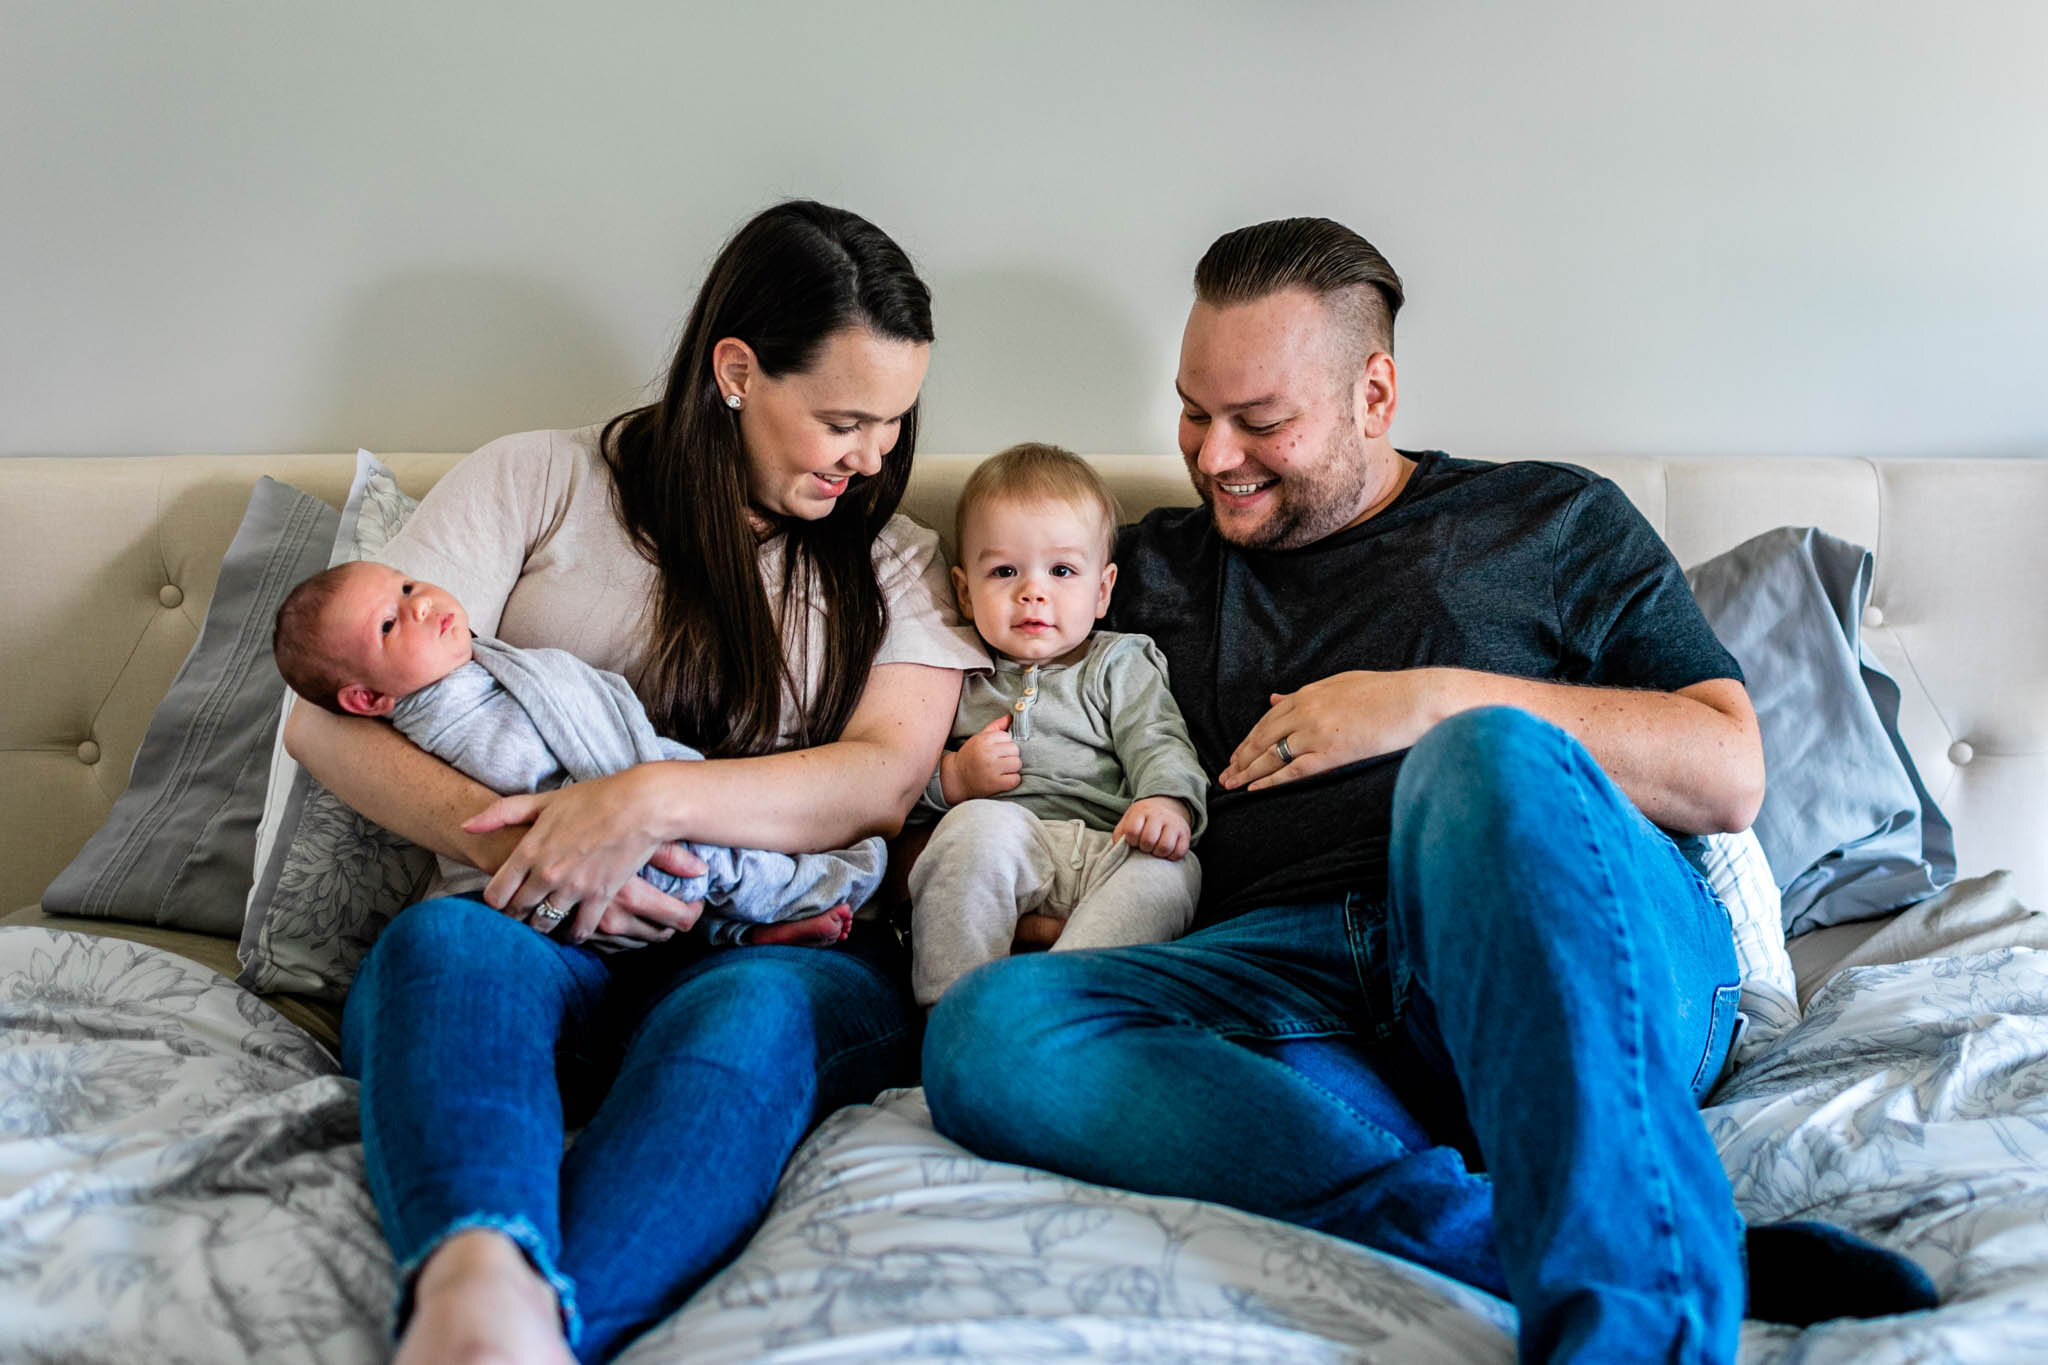 Family sitting on bed together | Lifestyle newborn photography at home | Holly Spring Newborn Photographer | By G. Lin Photography